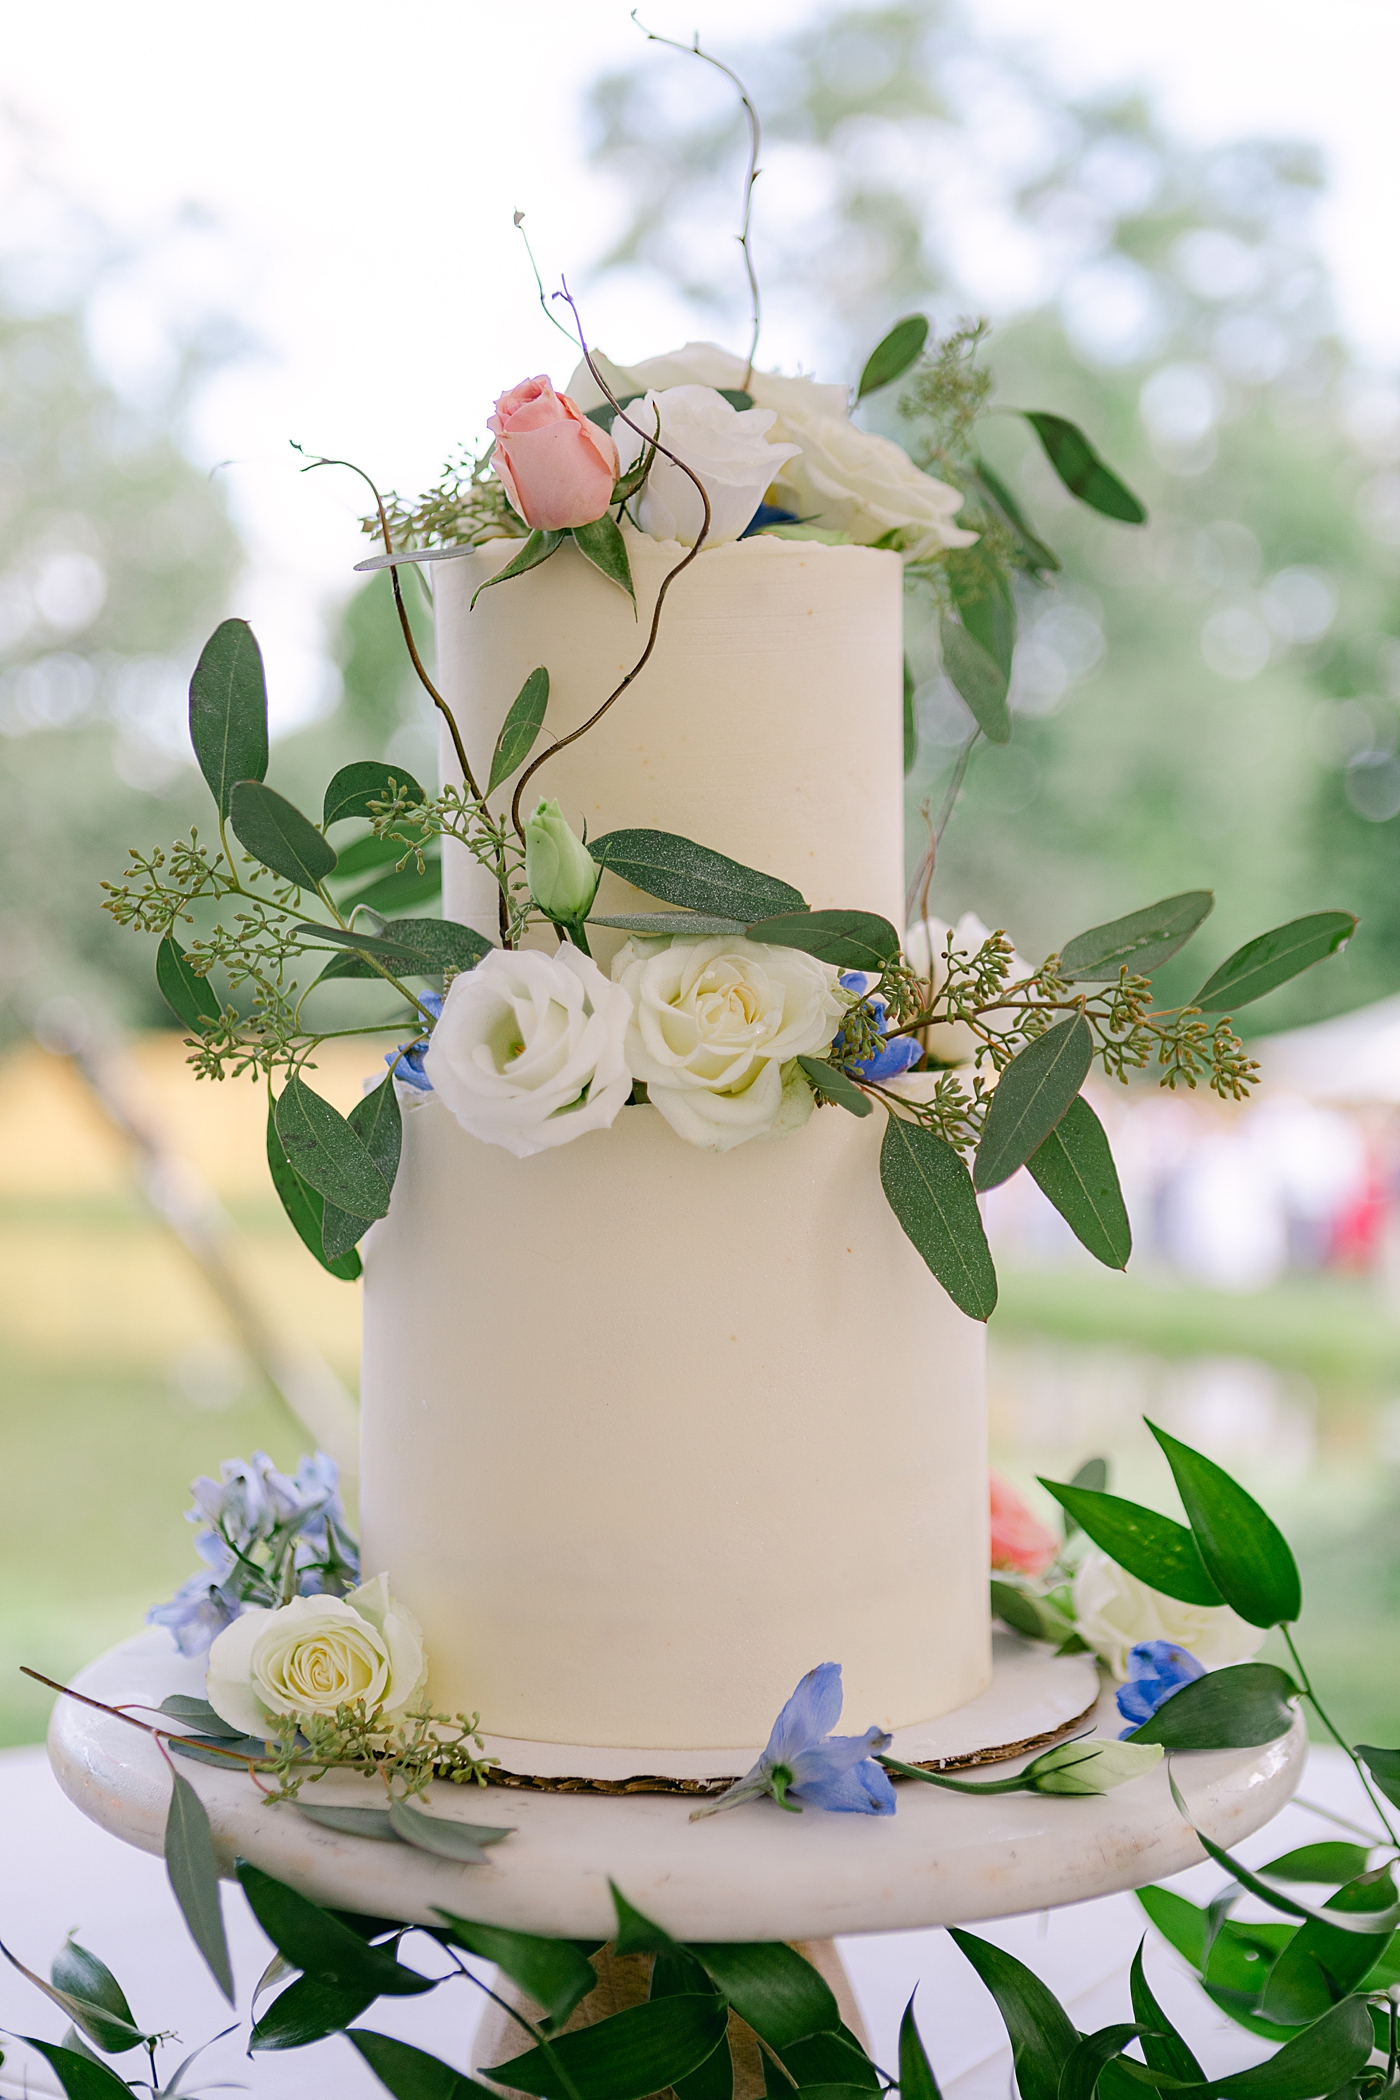 Wedding cake with flowers and greenery | Image by Hope Helmuth Photography